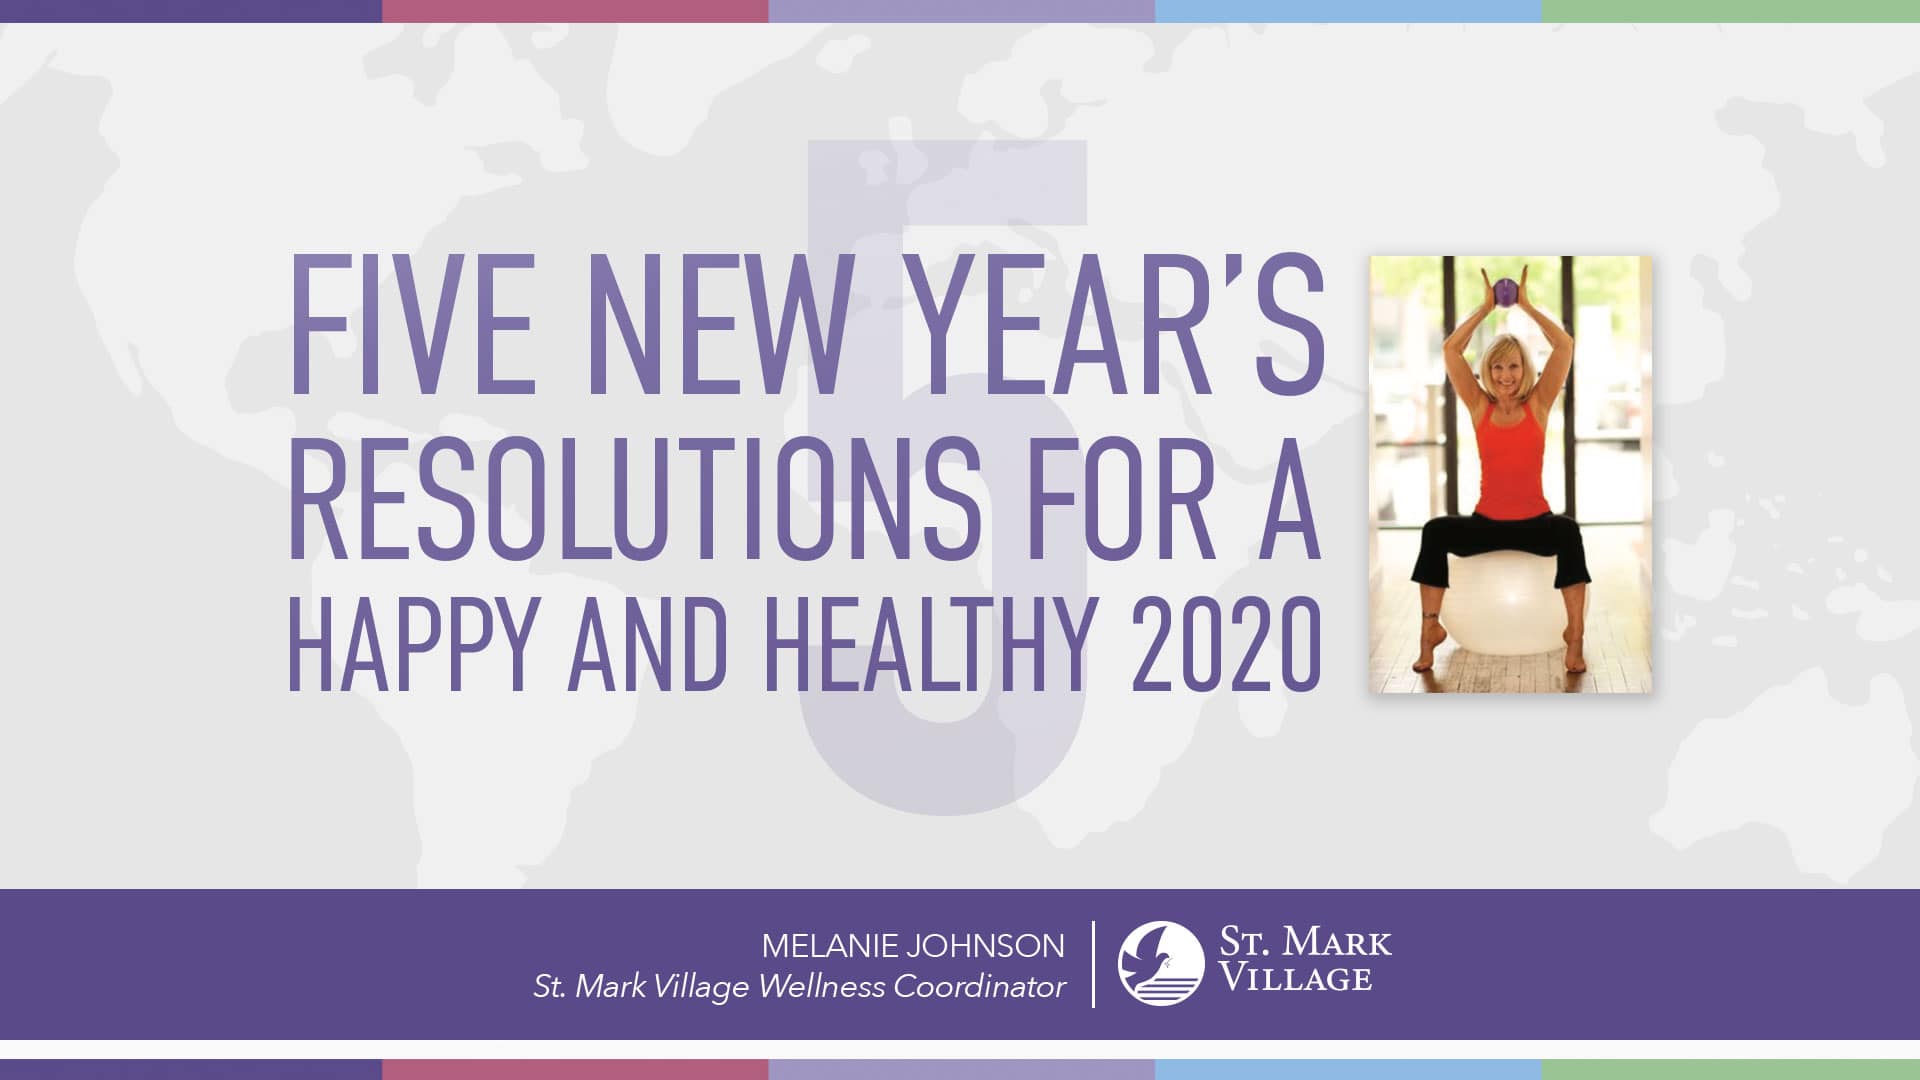 Five new year's resolutions for a happy and healthy 2020.